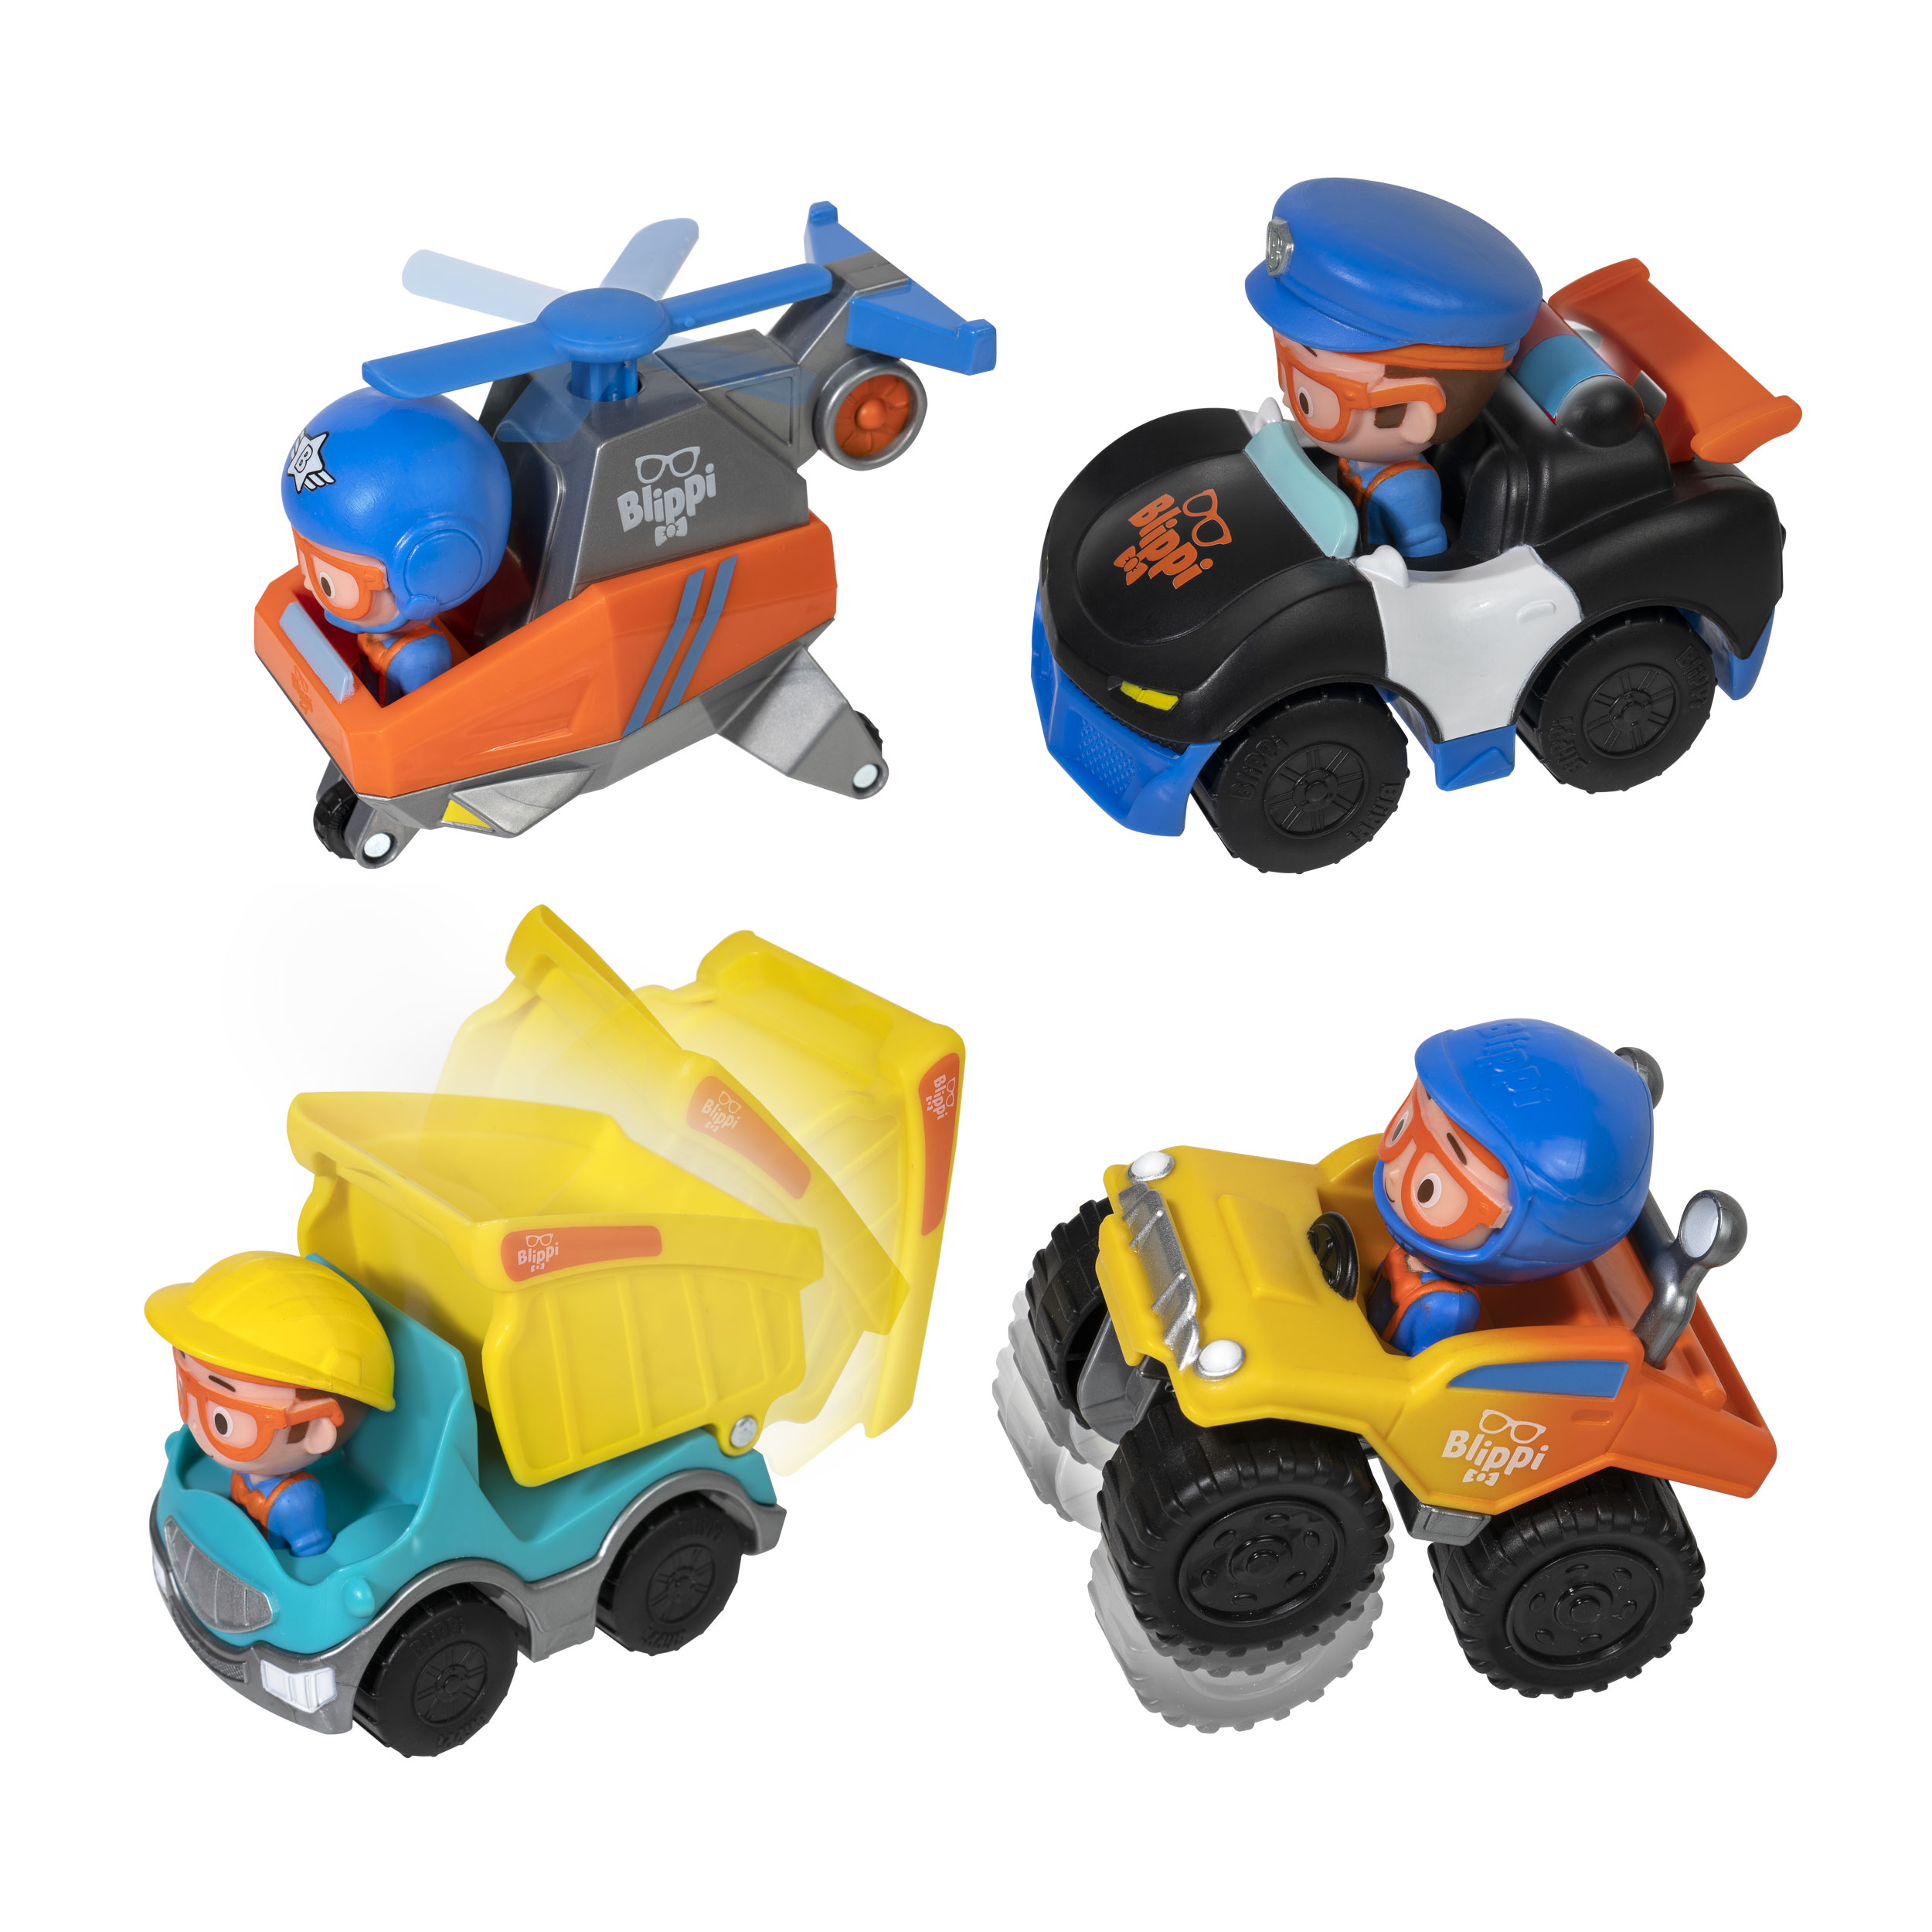 Blippi Mini Vehicles Assortment - Styles May Vary - 1 Vehicle Per Purchase (In Store Pick Up Only) - image 2 of 3